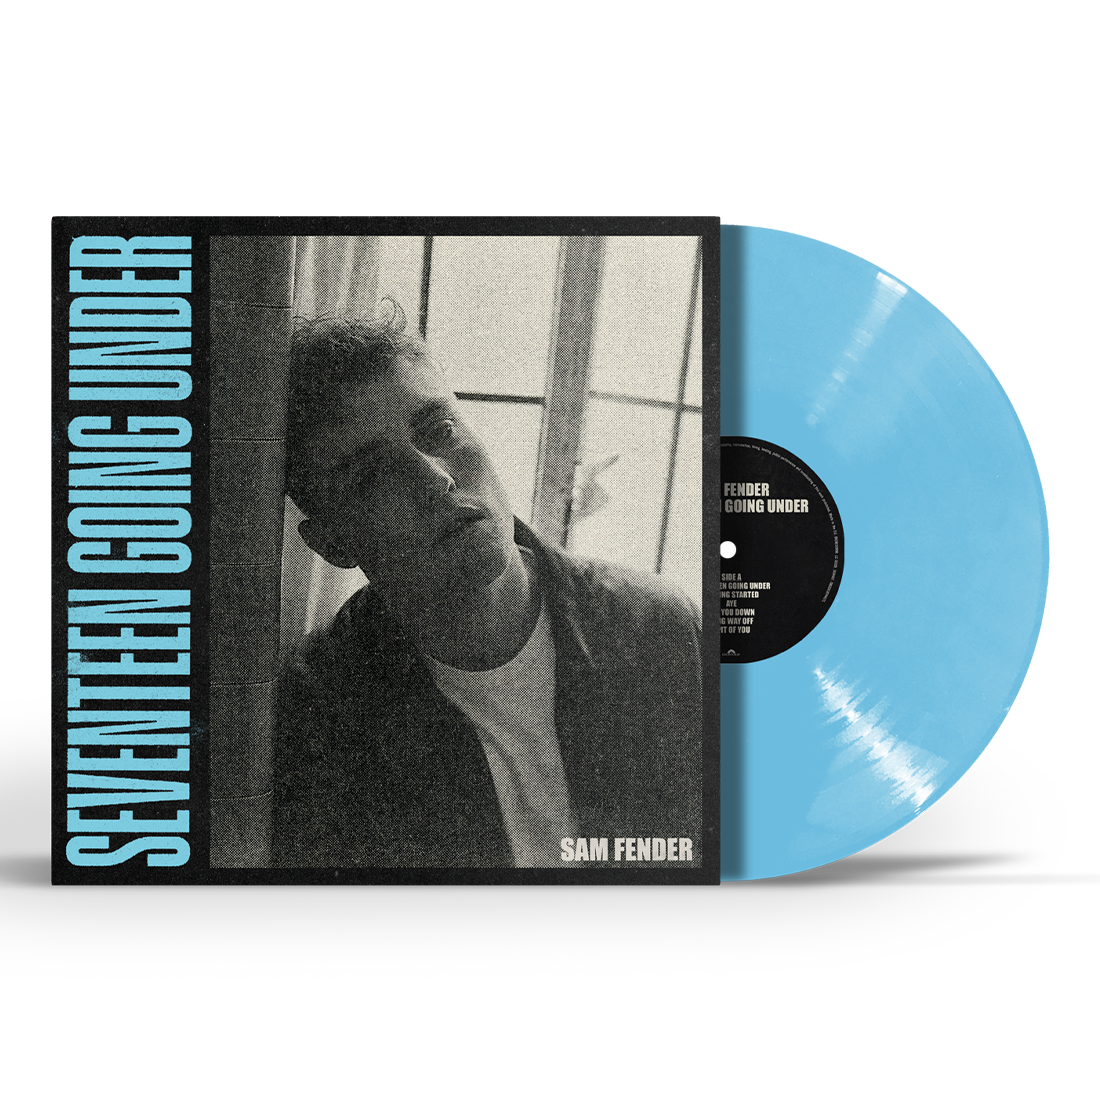 Sam Fender - Seventeen Going Under (Indies Exclusive Limited Edition Baby Blue Vinyl) REDUCED TO DUE BLOW OUT ON THE SLEEVE